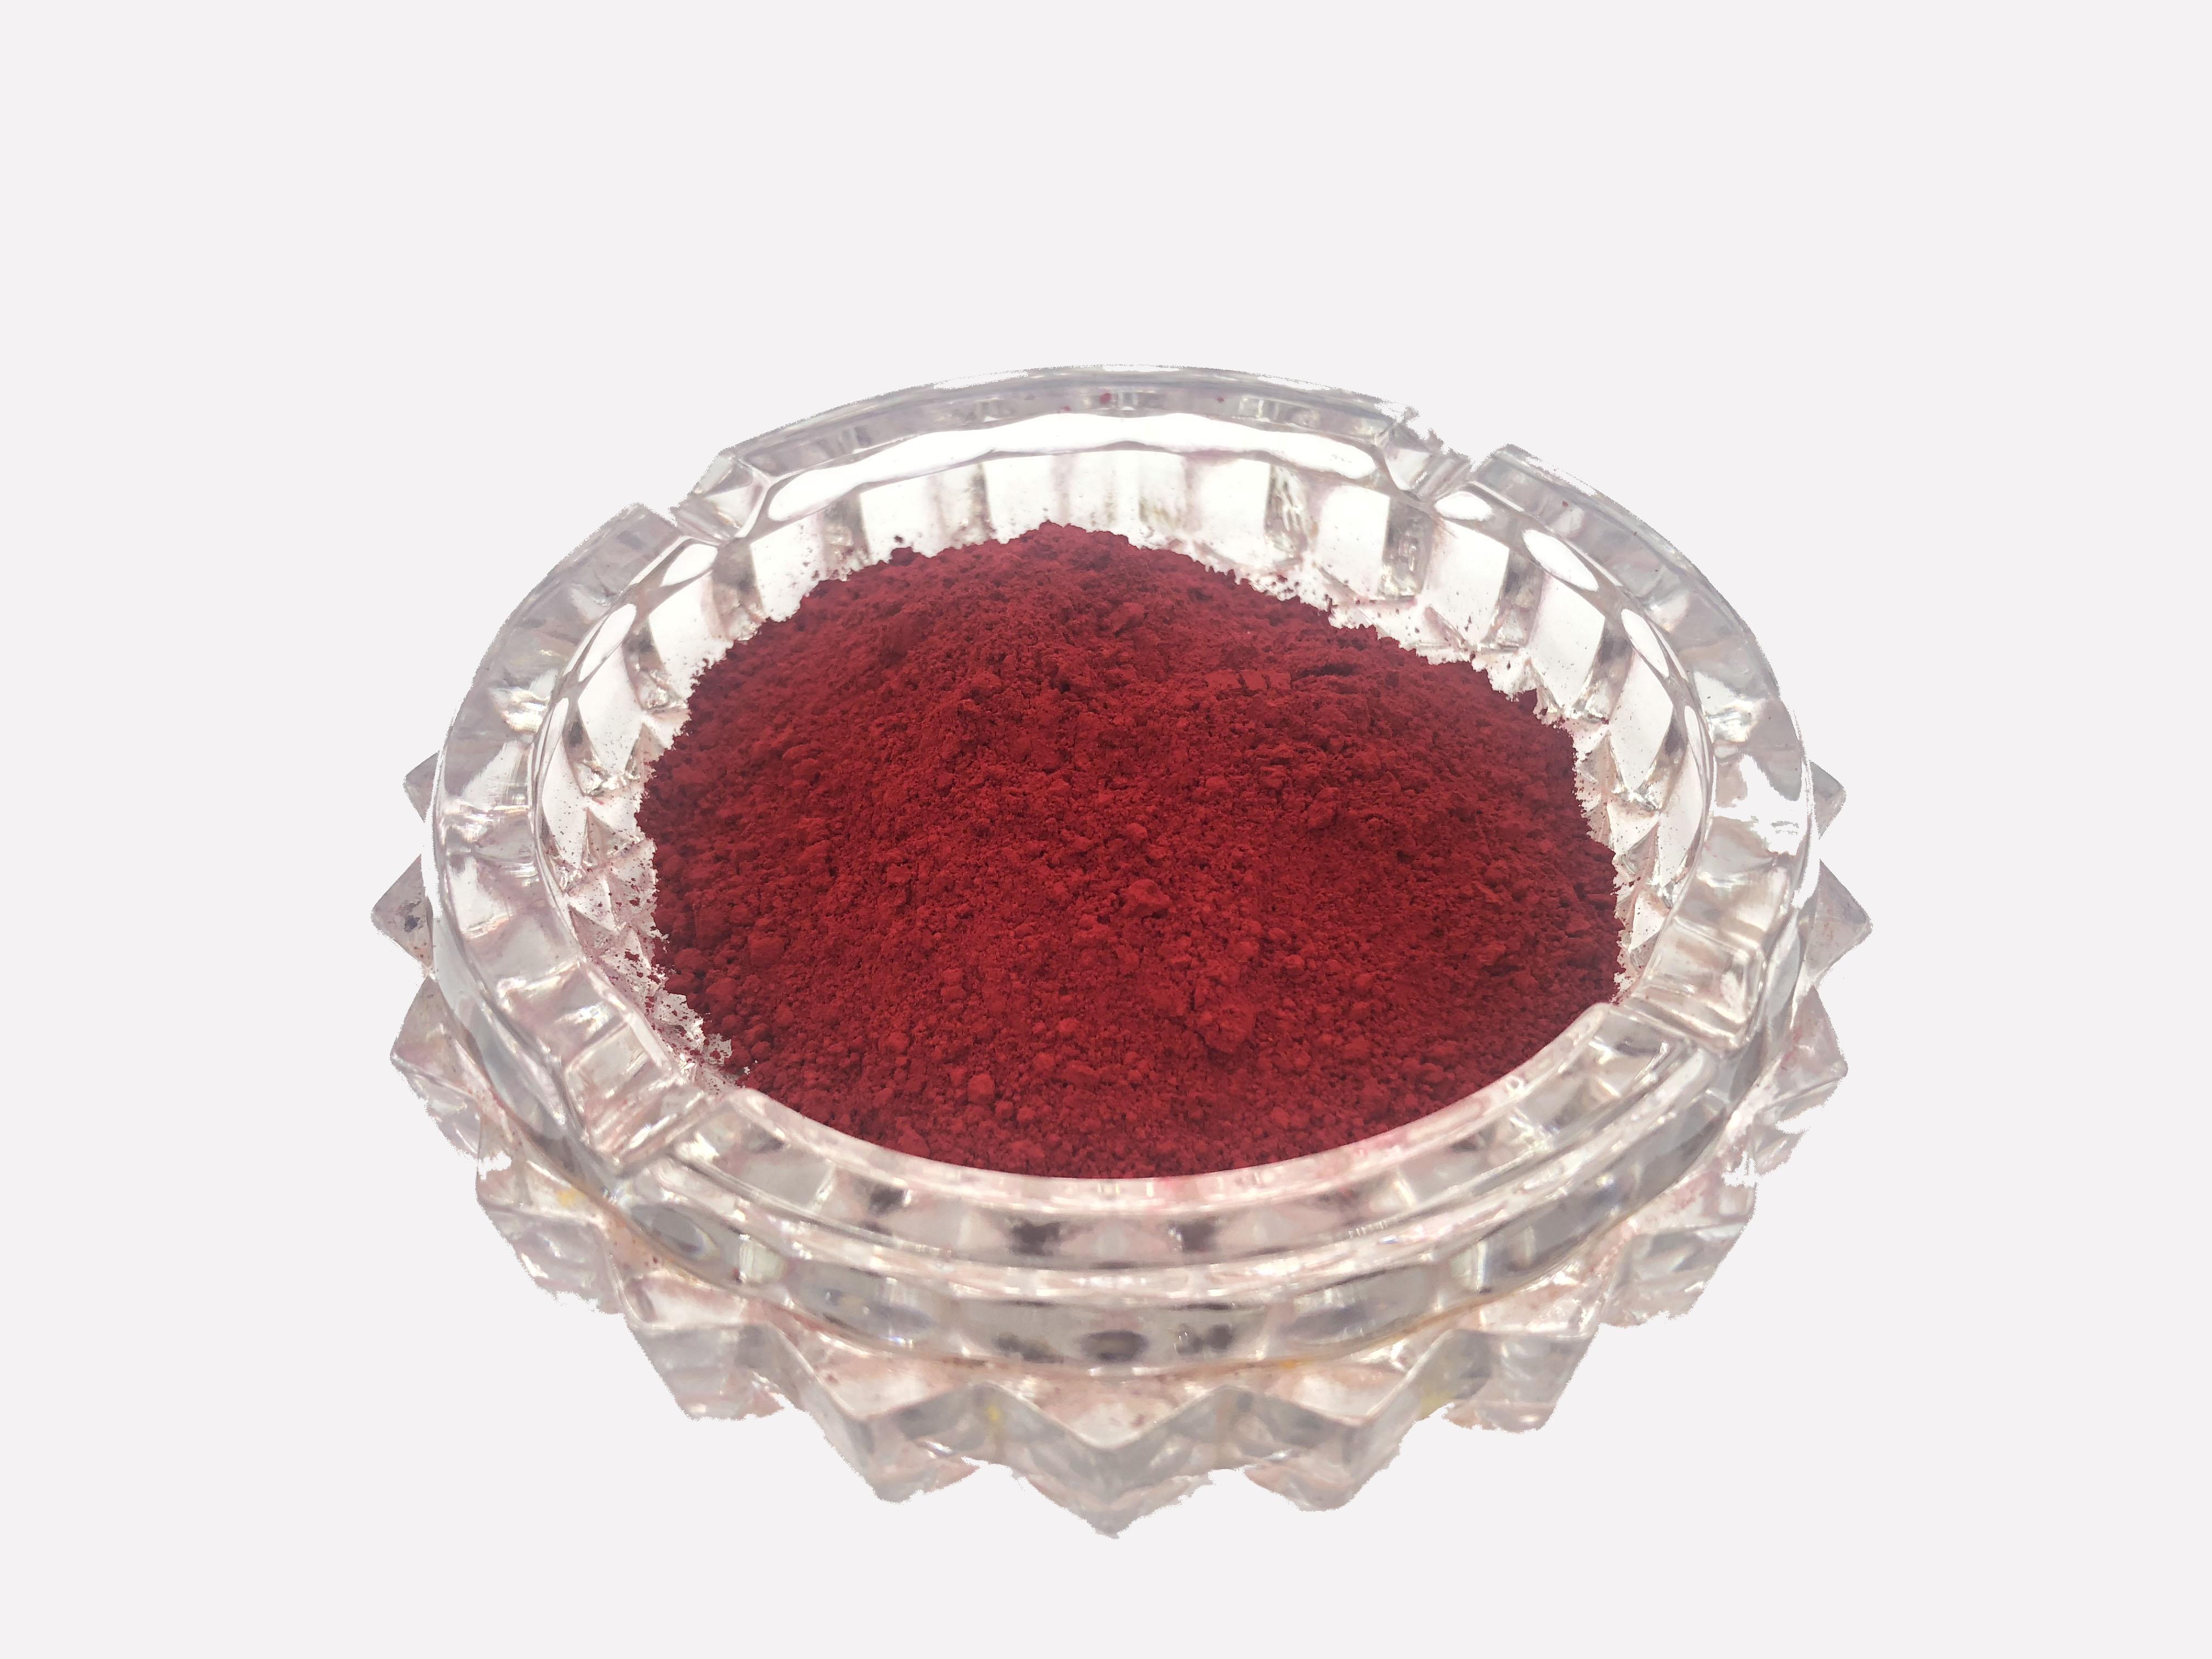 Pigment Red 185 Organic Powder Permanent Carmine Benzimidazolone Cermine HF4C CAS 51920-12-8 For Paint Ink Rubber Plastic ABS